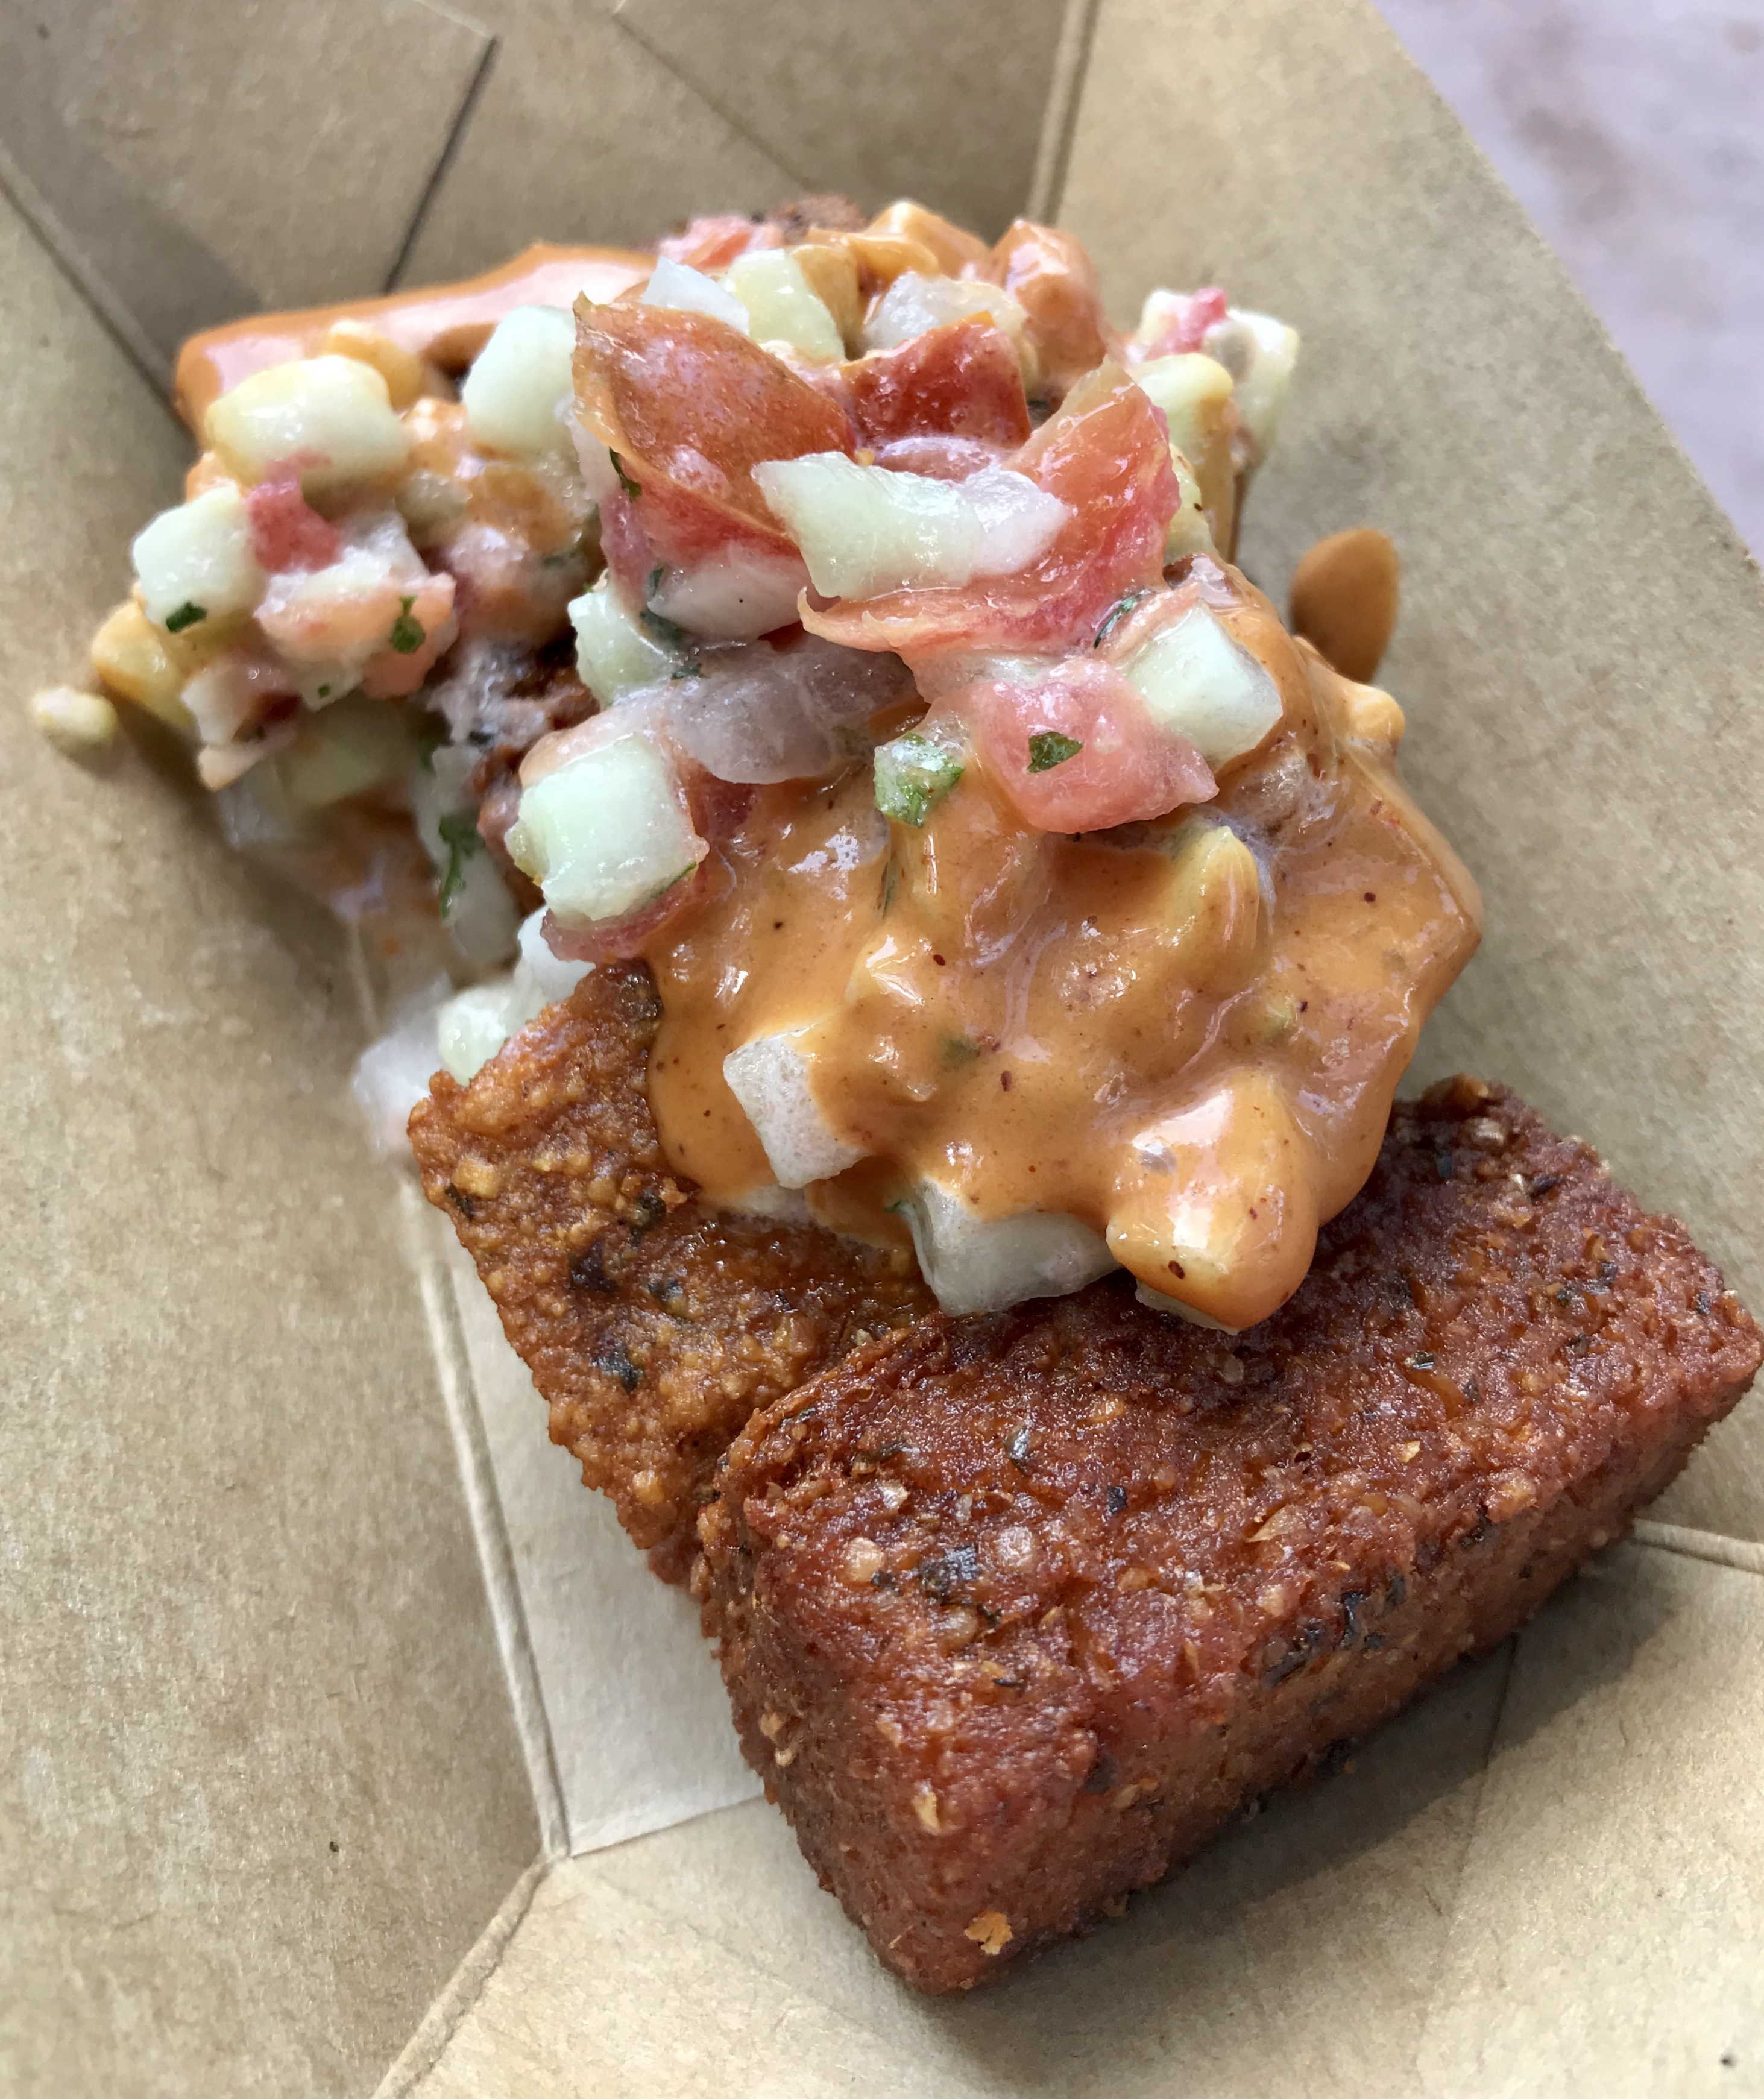 Hummus Fries from Morocco at epcot food and wine festival